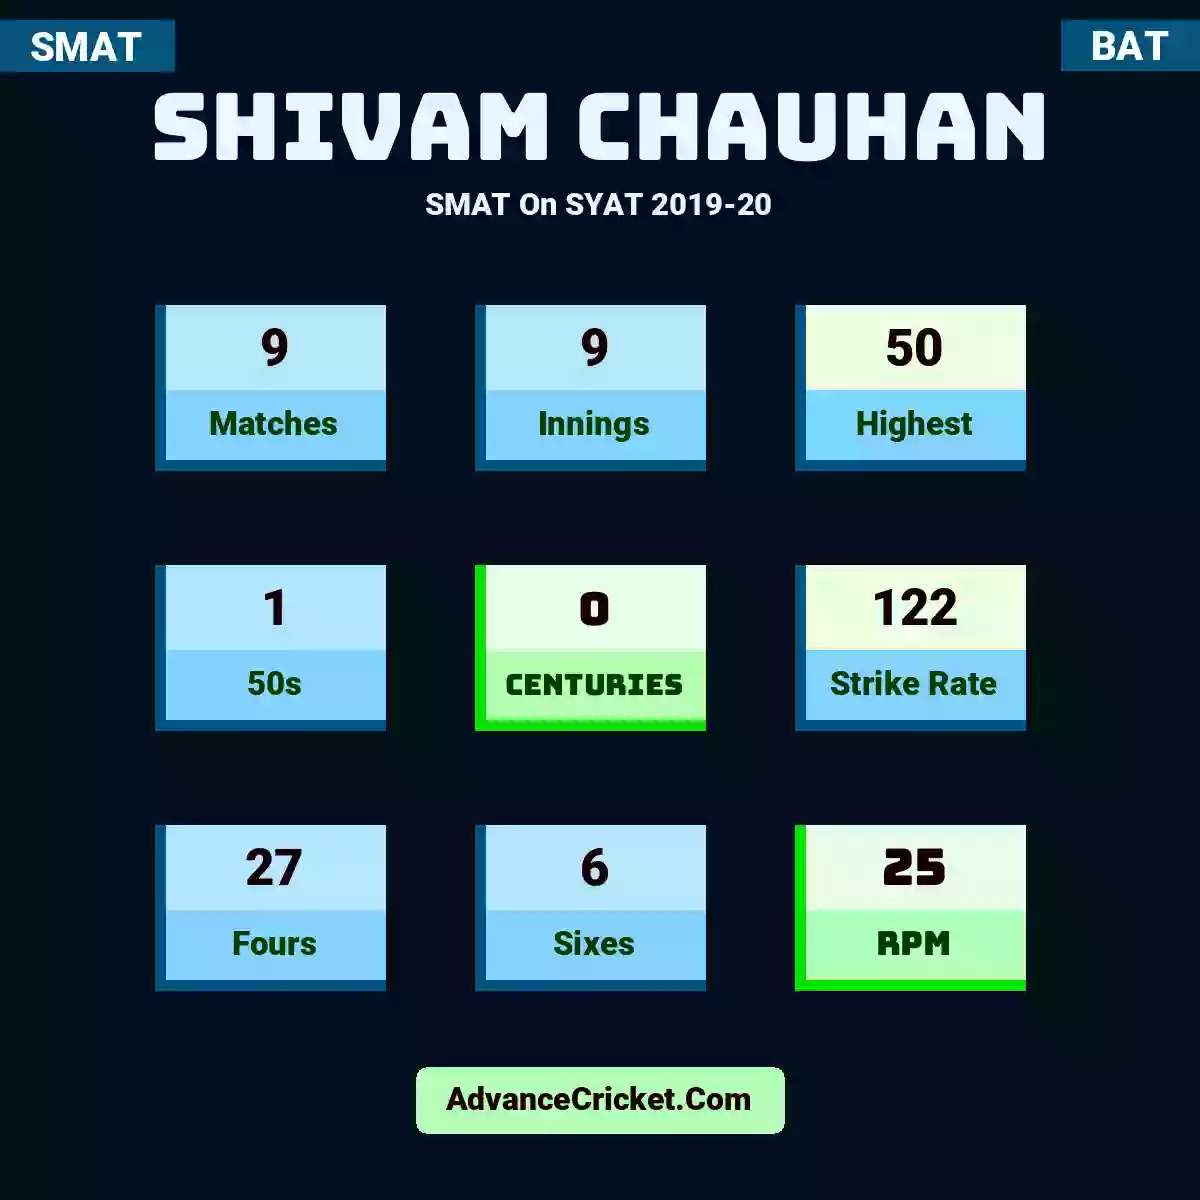 Shivam Chauhan SMAT  On SYAT 2019-20, Shivam Chauhan played 9 matches, scored 50 runs as highest, 1 half-centuries, and 0 centuries, with a strike rate of 122. S.Chauhan hit 27 fours and 6 sixes, with an RPM of 25.